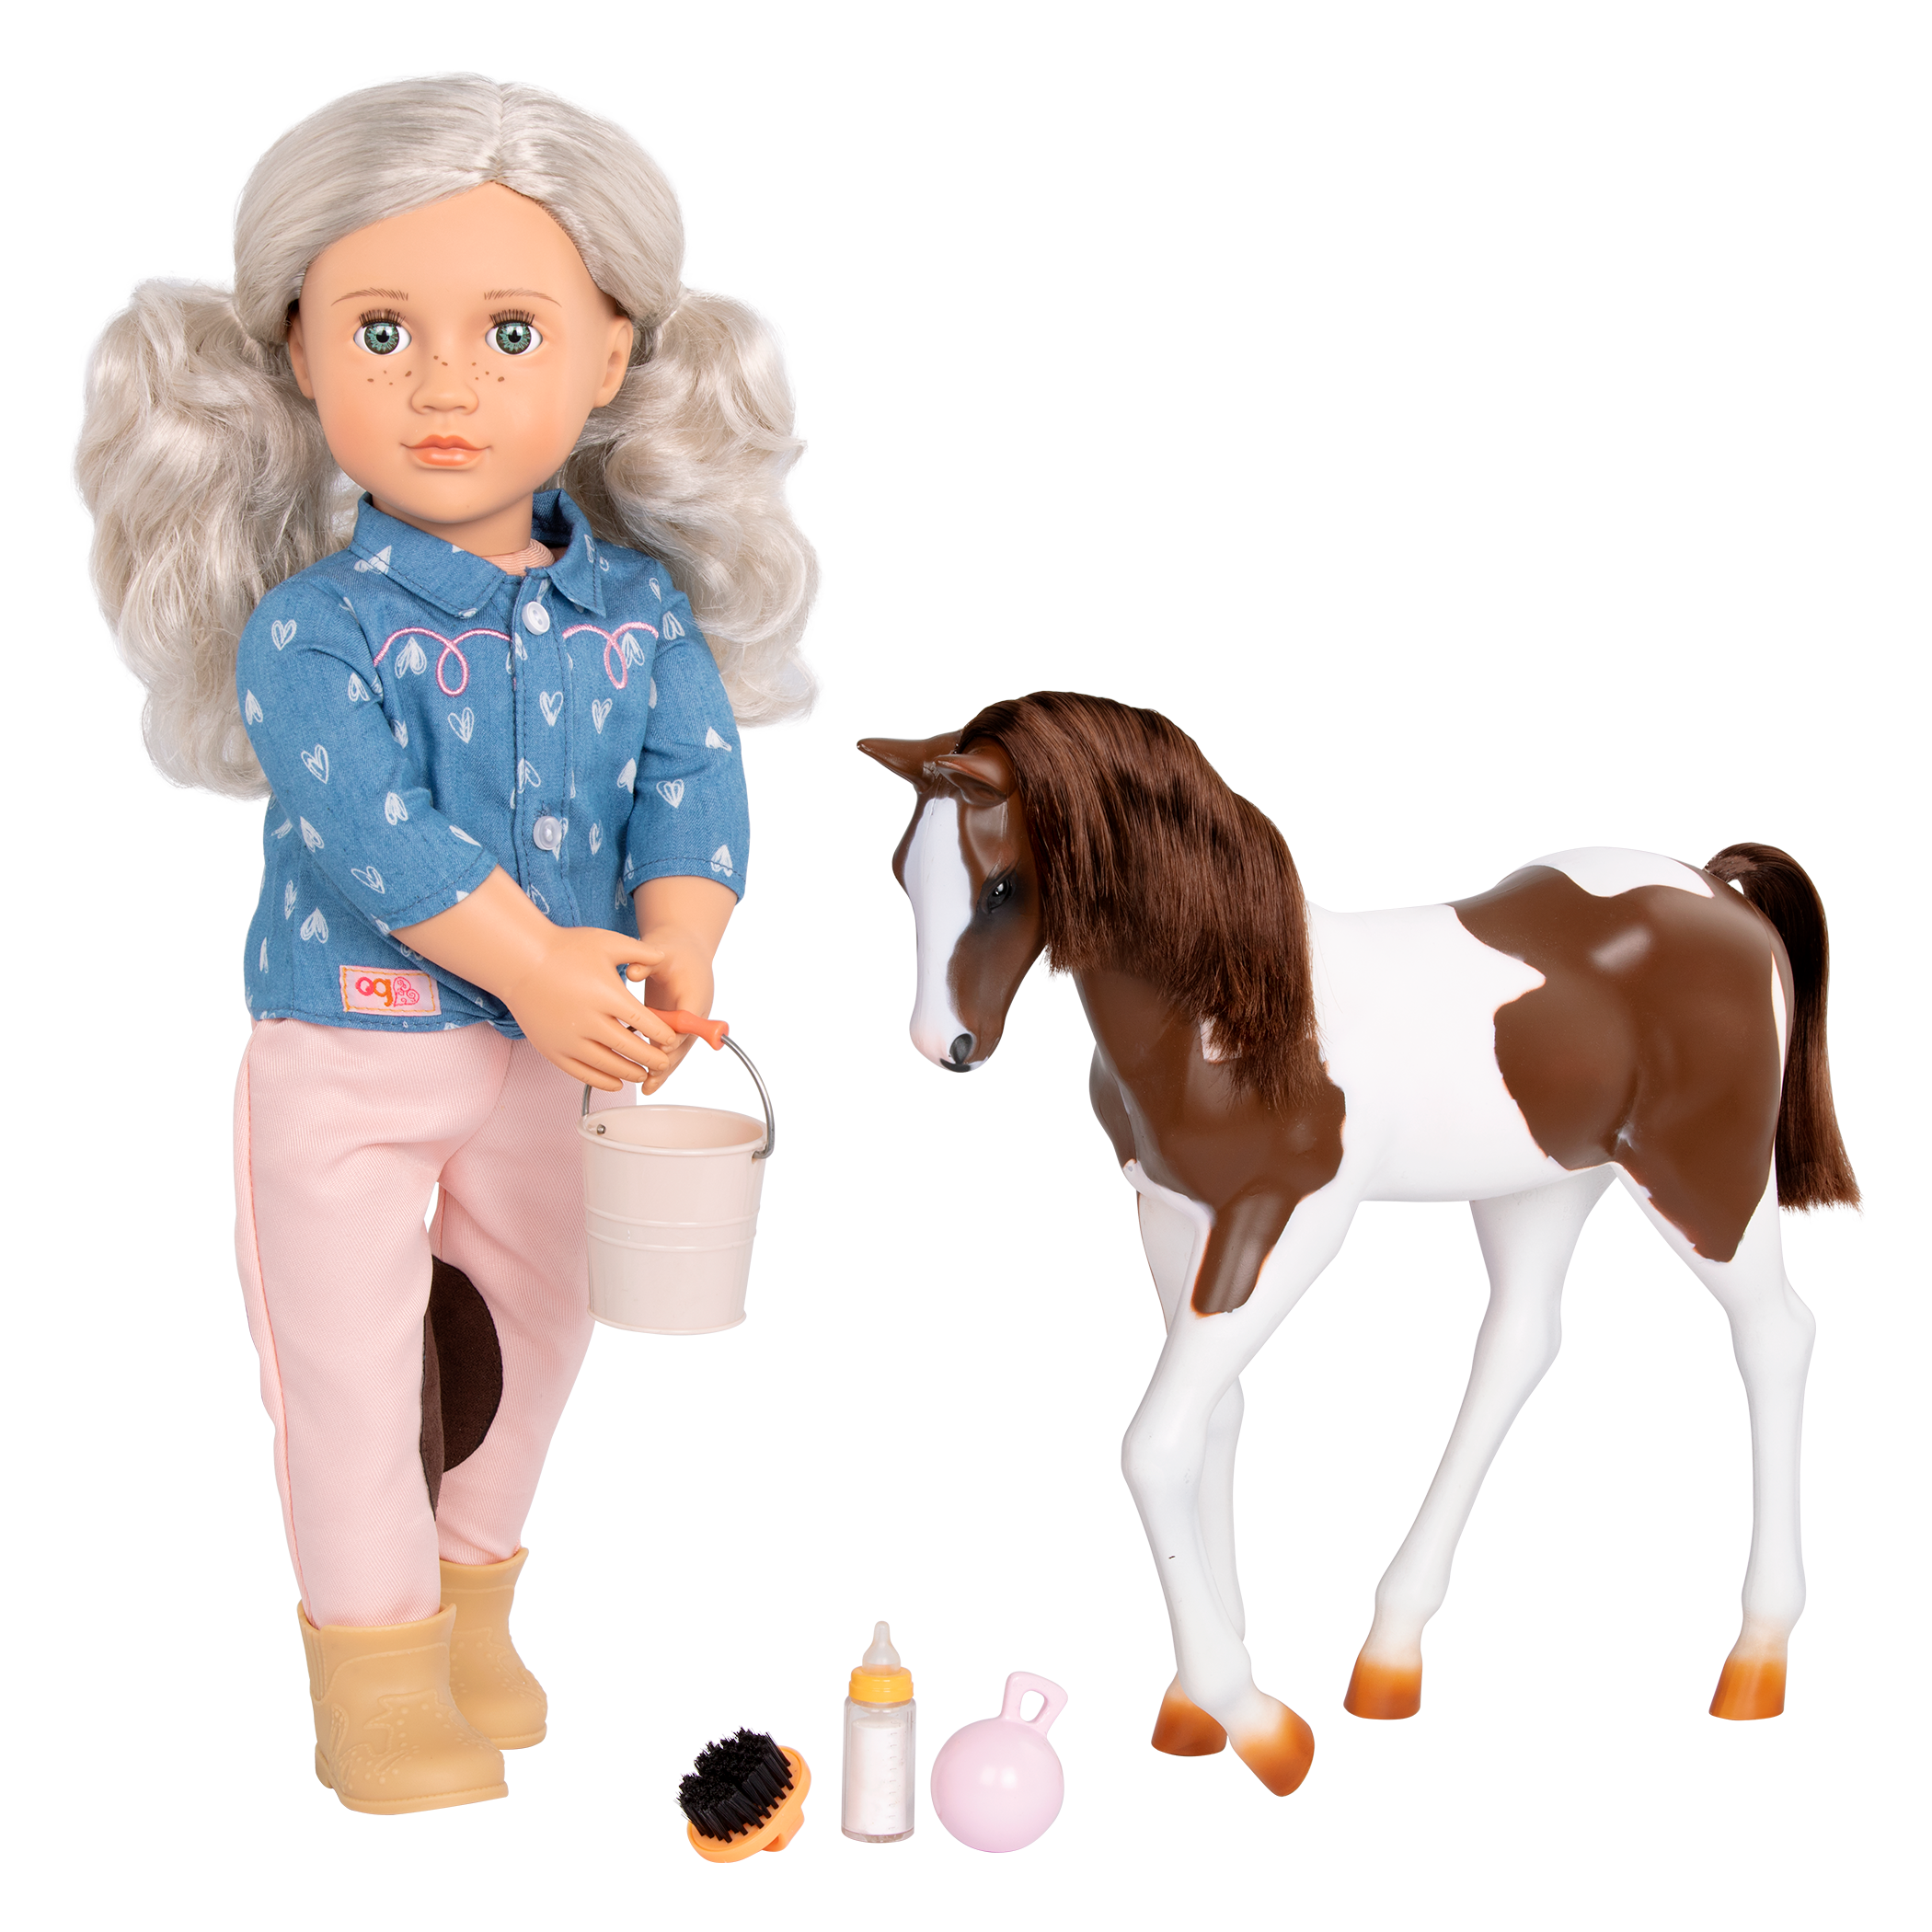 18-inch doll with silver hair, green eyes, horse accessories and toy foal